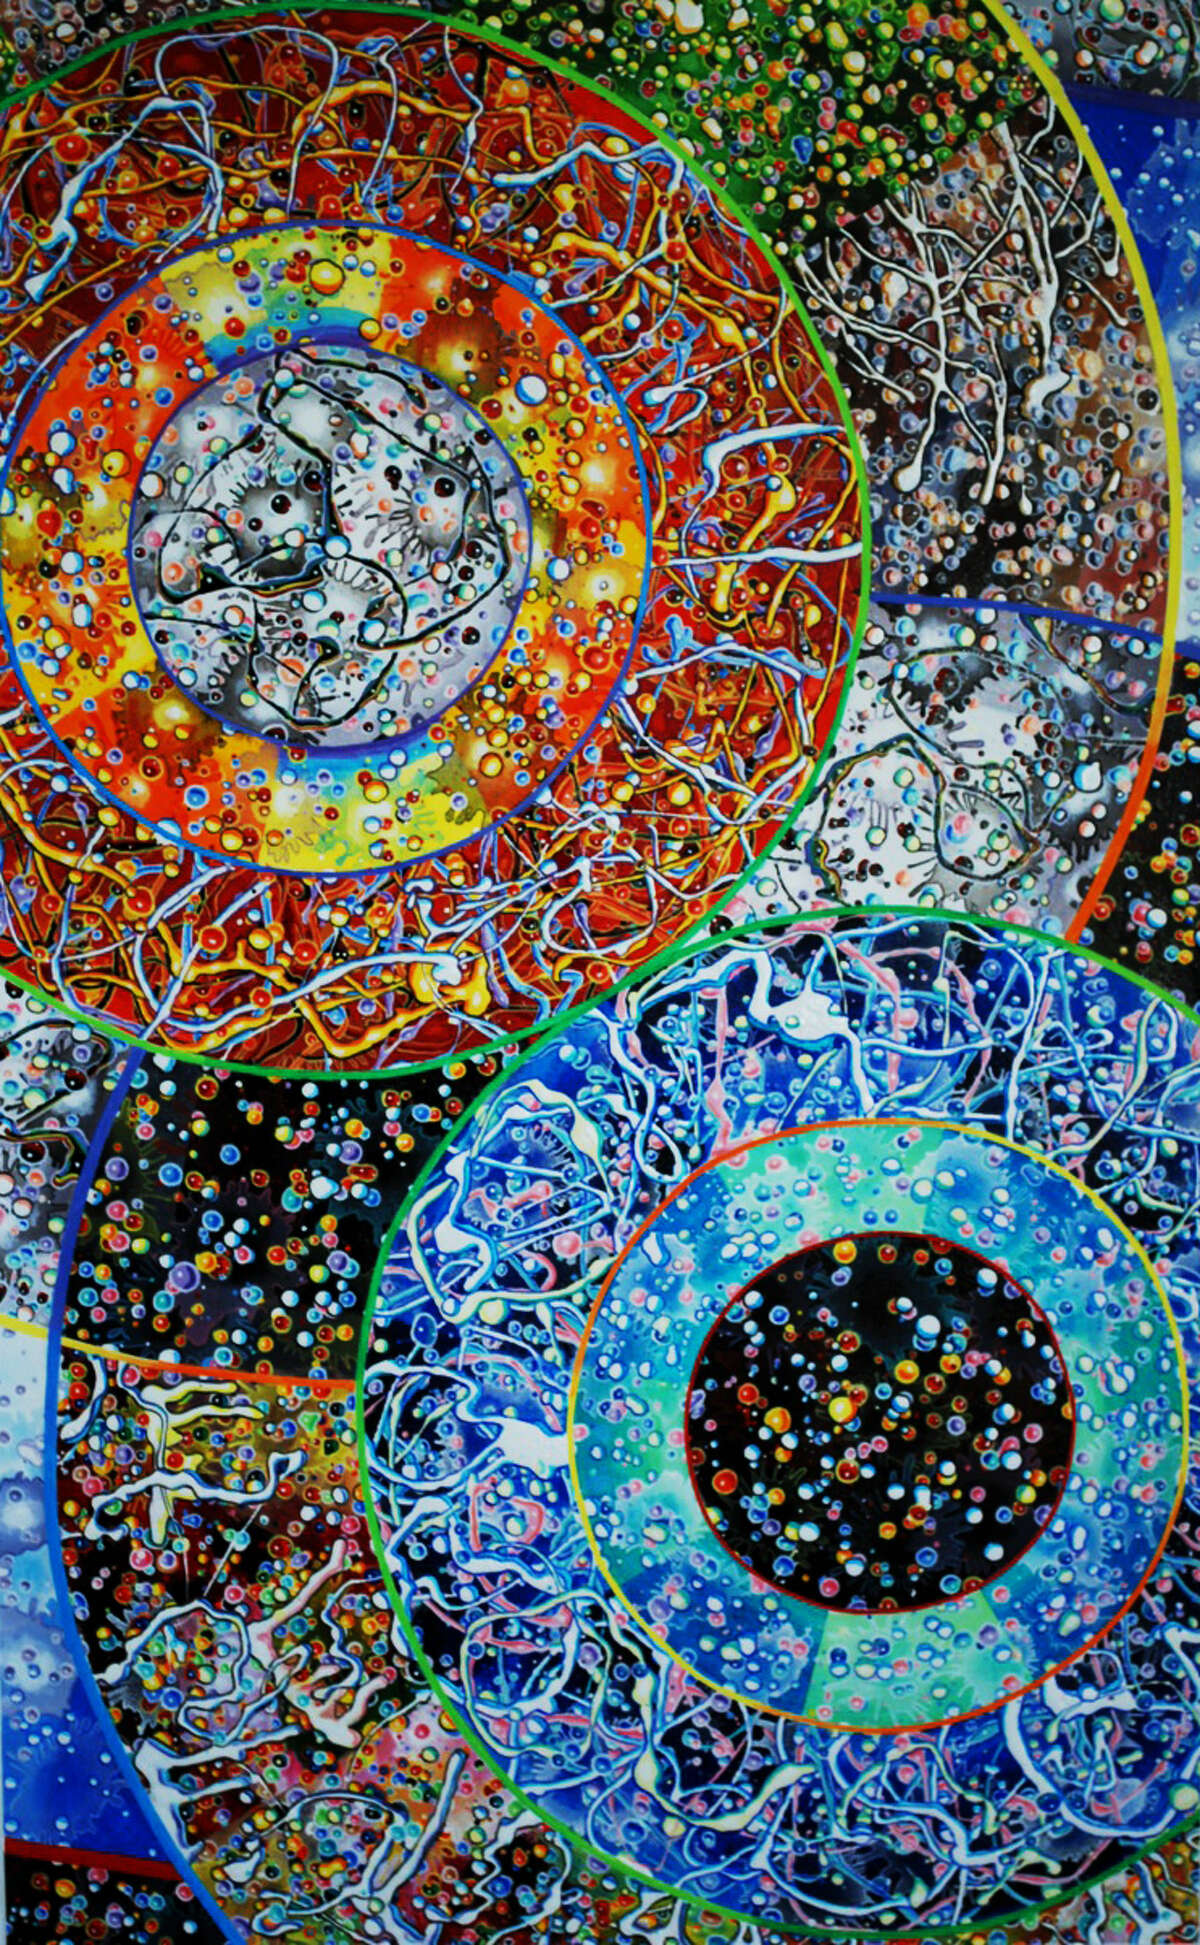 See Mark Dell'Isola's eye-opening paintings, including "Double Circle," Saturday through Aug. 24 at Deborah Colton Gallery.